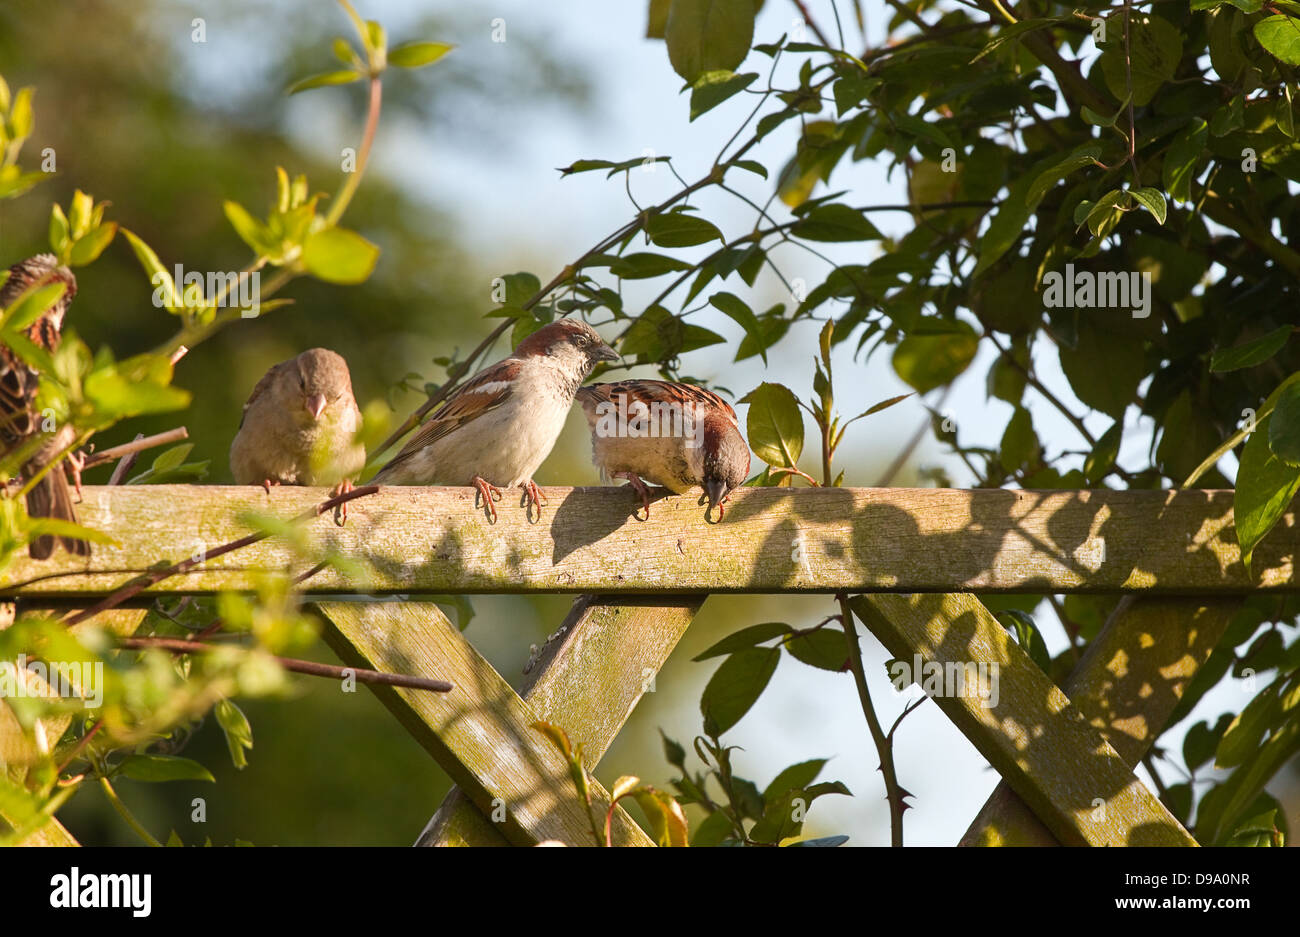 Group of House sparrows sitting on garden fence with climbing plants in evening sun Stock Photo